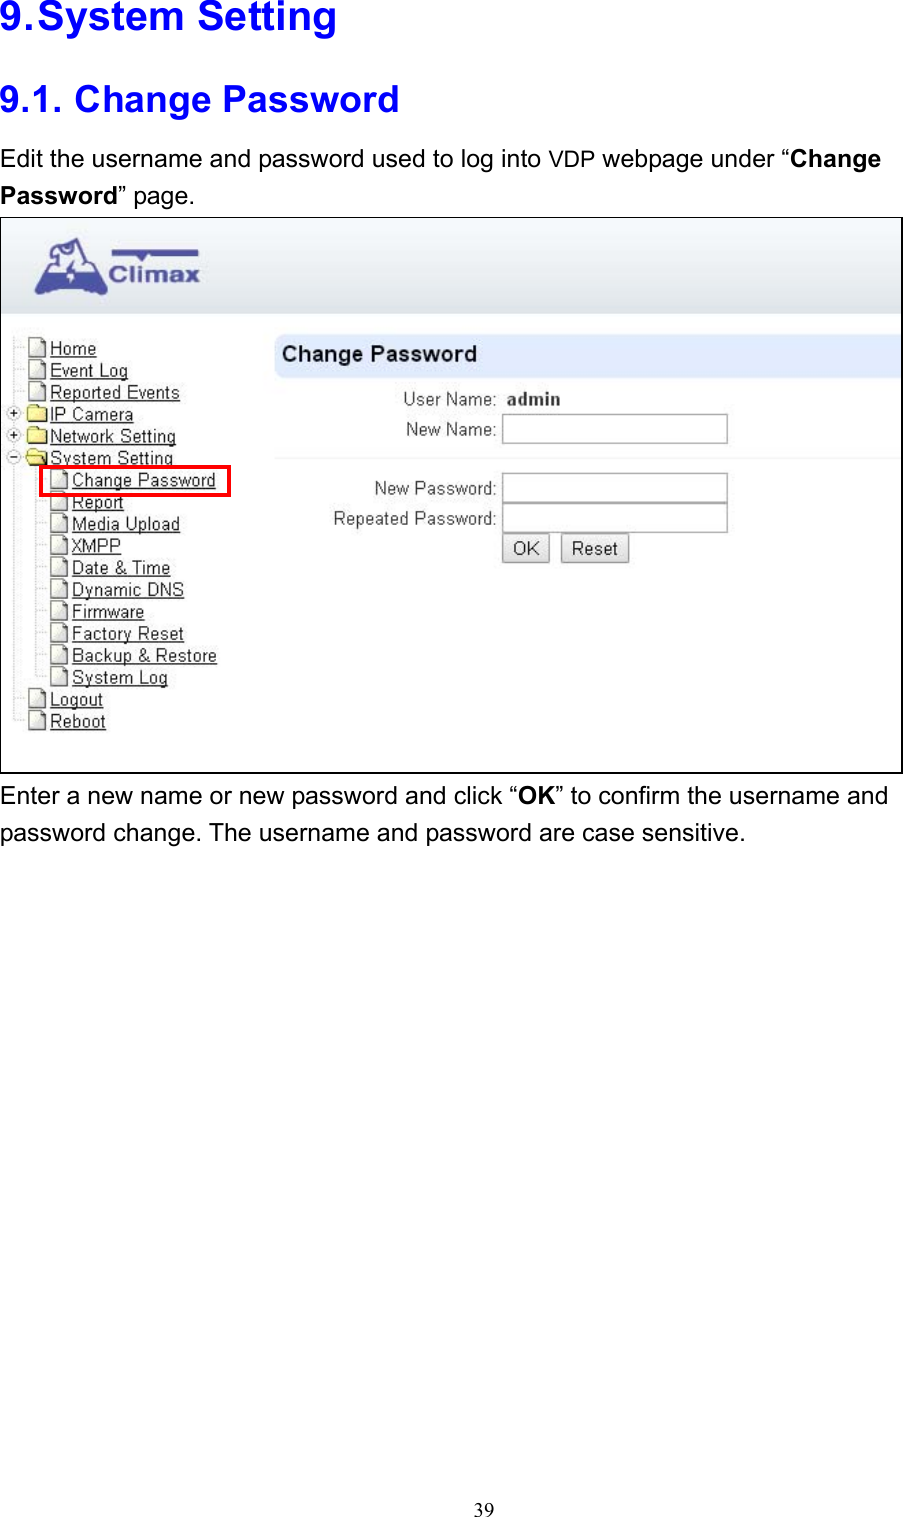 39  9. System Setting 9.1. Change Password Edit the username and password used to log into VDP webpage under “Change Password” page.  Enter a new name or new password and click “OK” to confirm the username and password change. The username and password are case sensitive.  